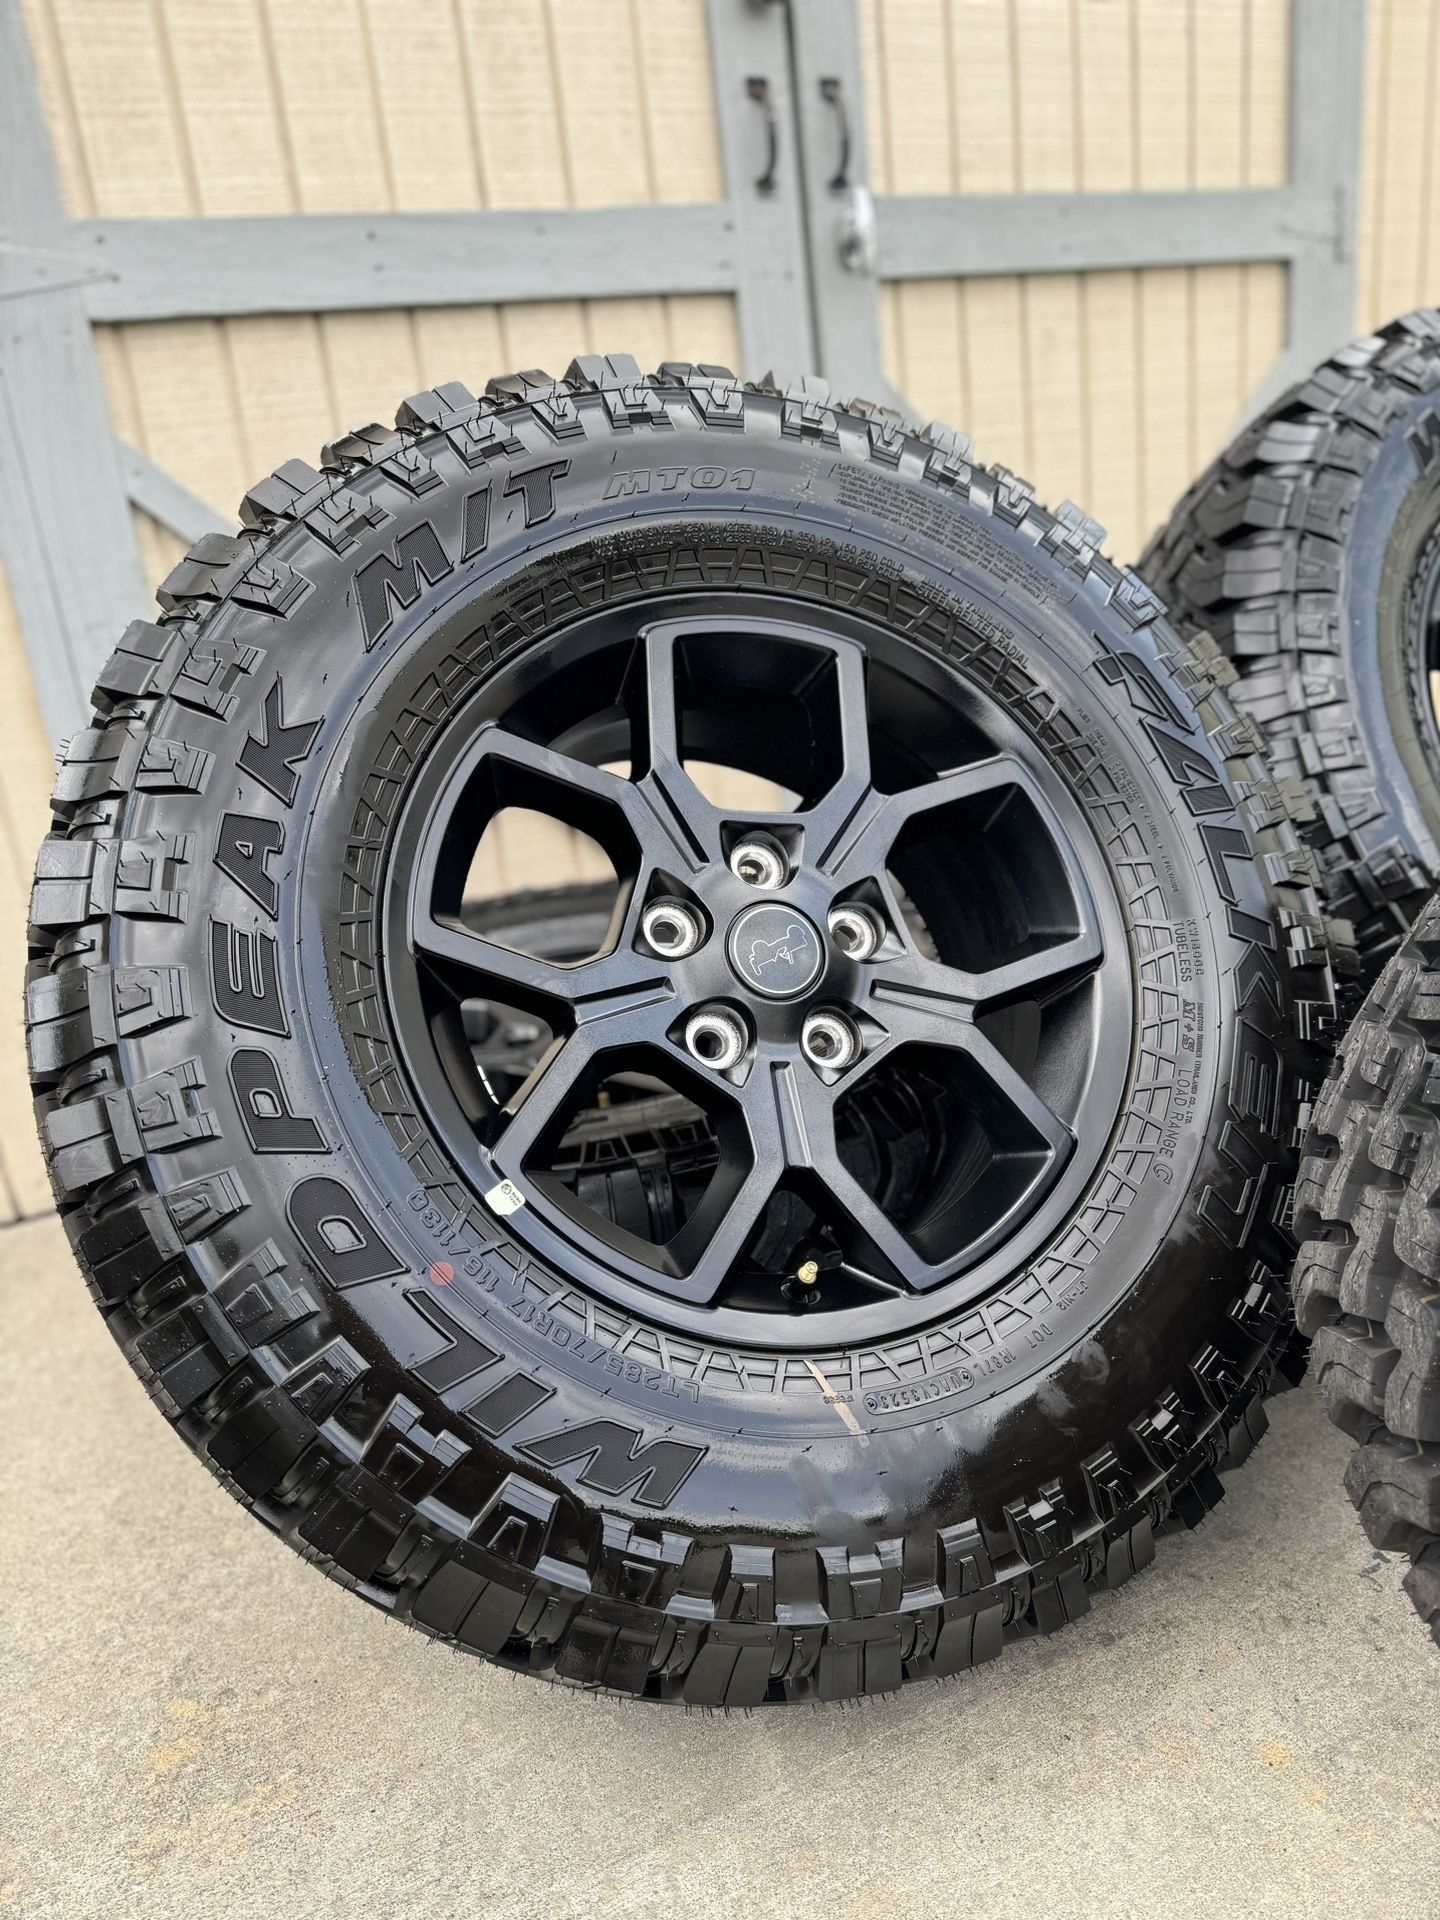 Brand New Take Offs Keep Wrangler 17 Inch Wheels And Mud Tires 